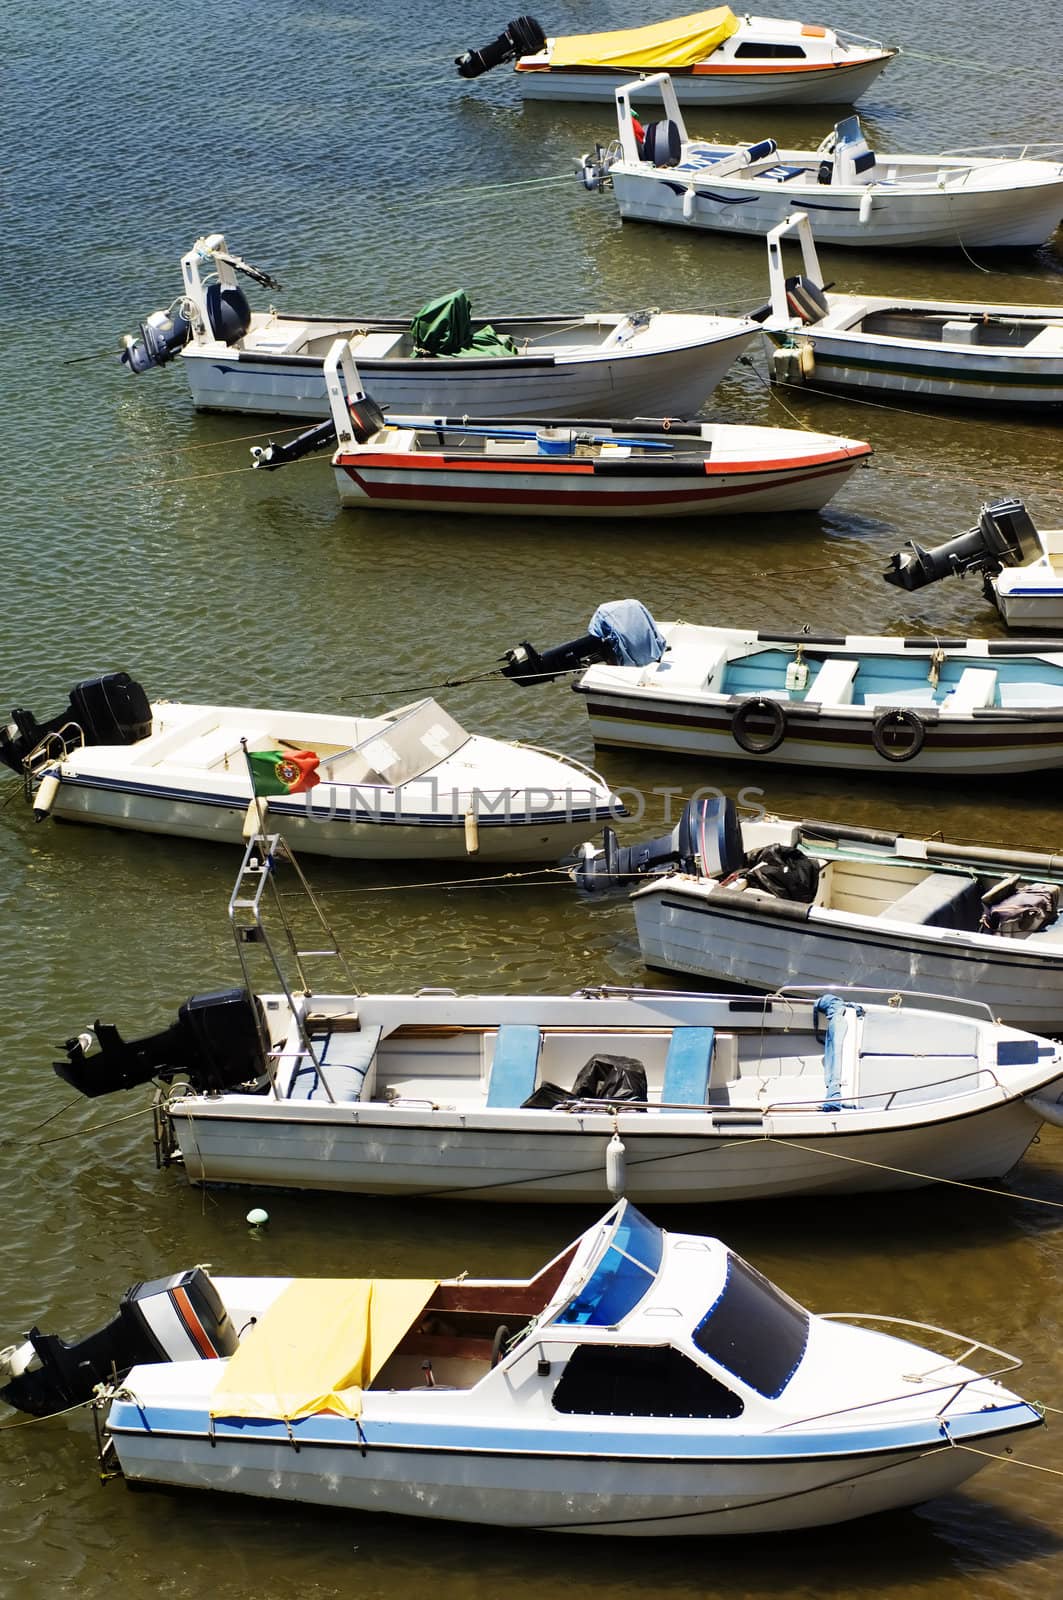 Small motorboats moored